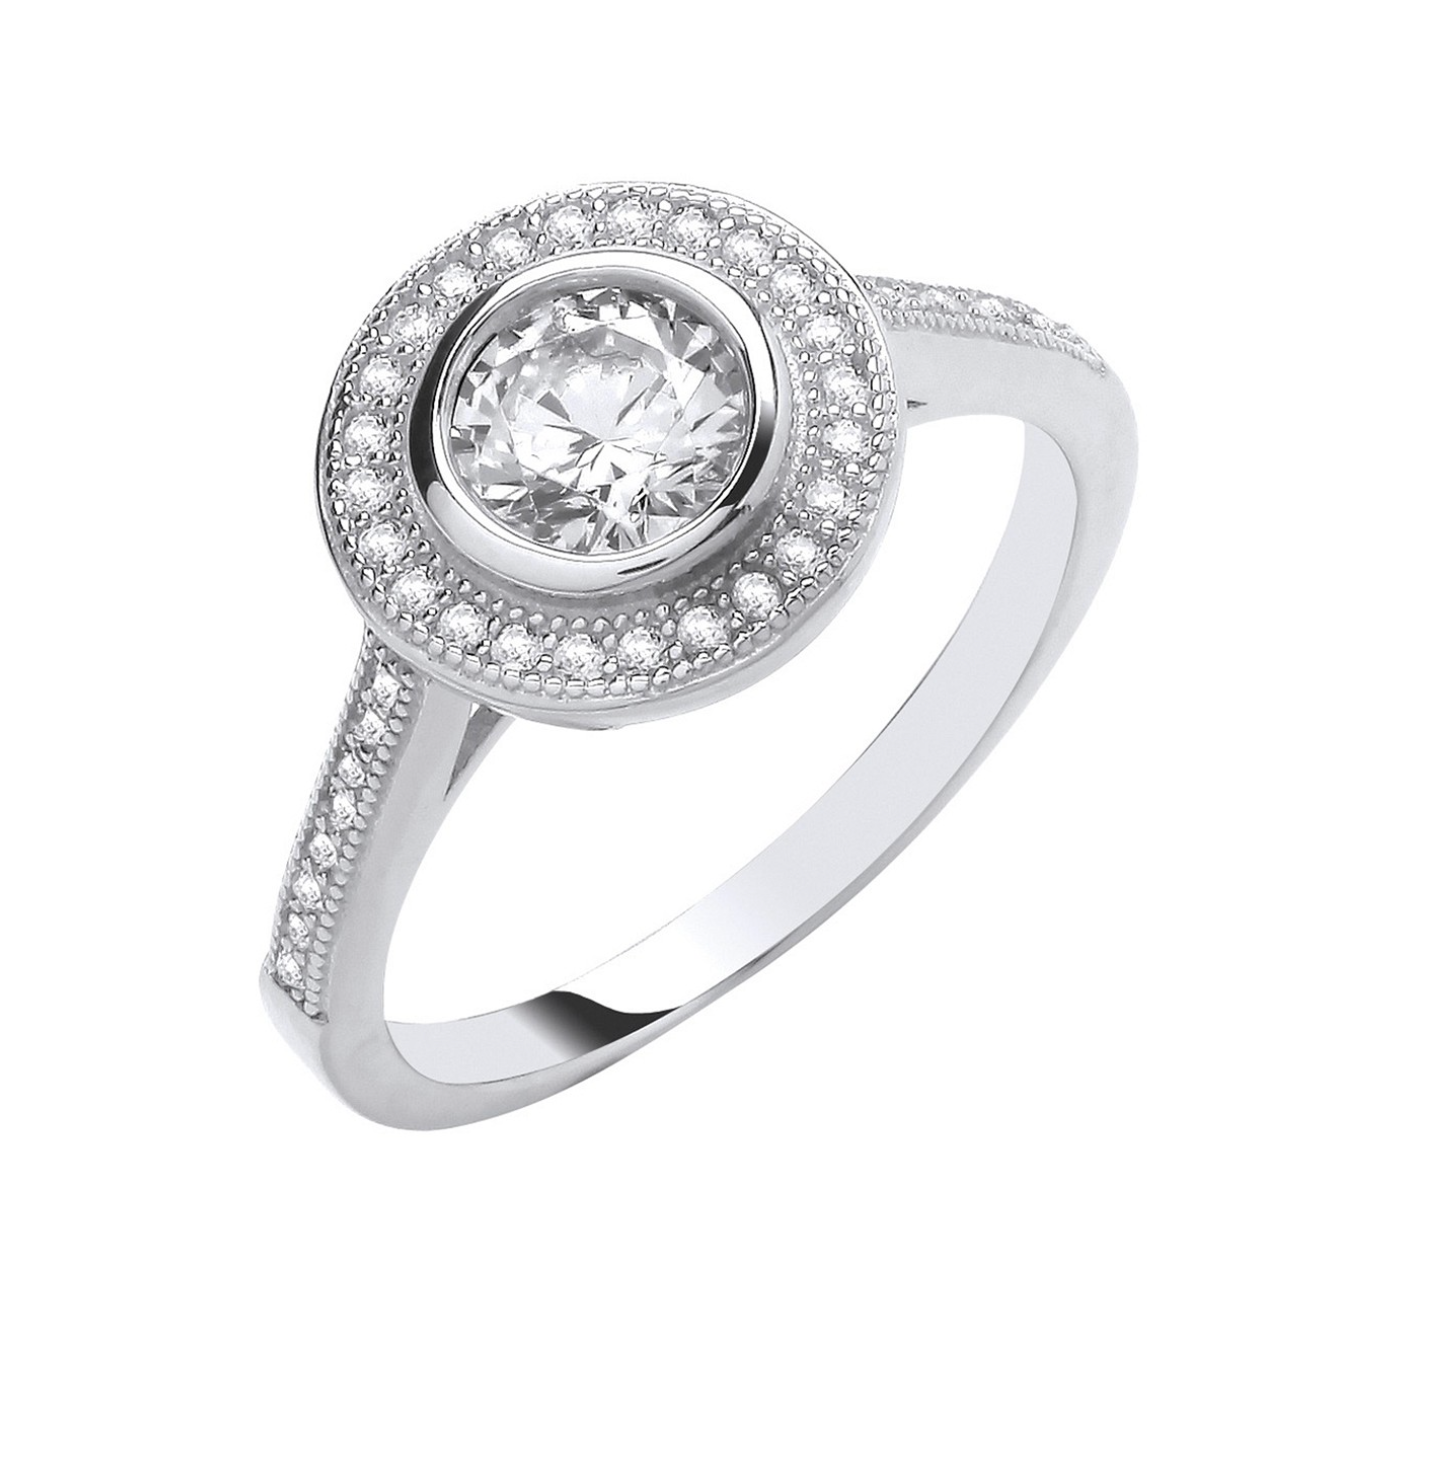 Silver Halo Rub-Over Cubic Zirconia Ring